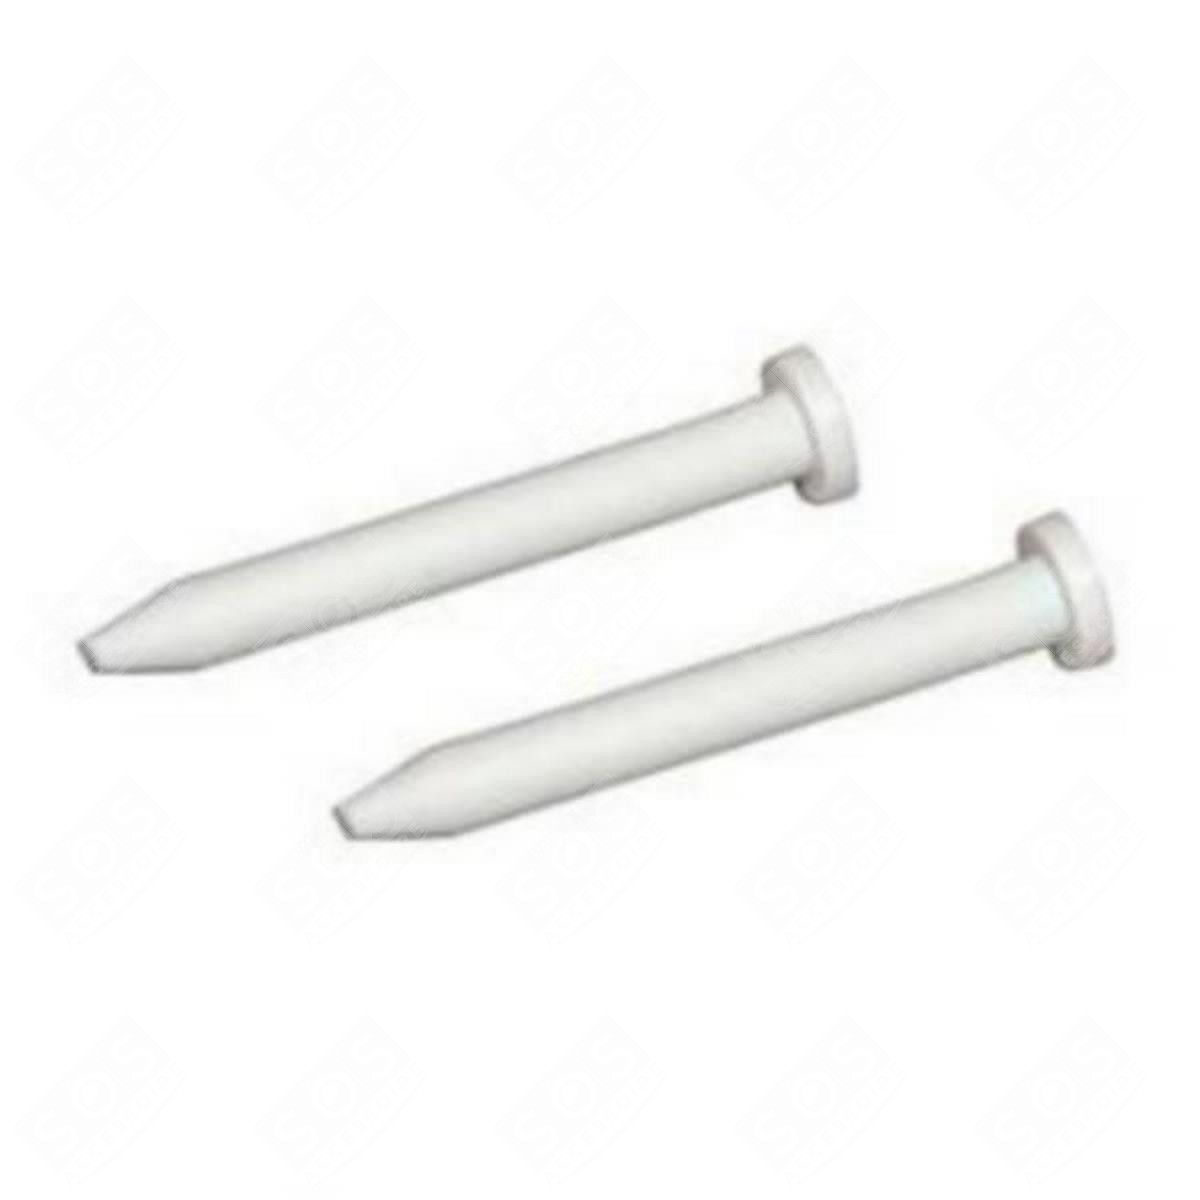 Lid Pins (Set of 2 Pieces) for Candy Hoover Washing Machines - 49033811 Candy / Hoover